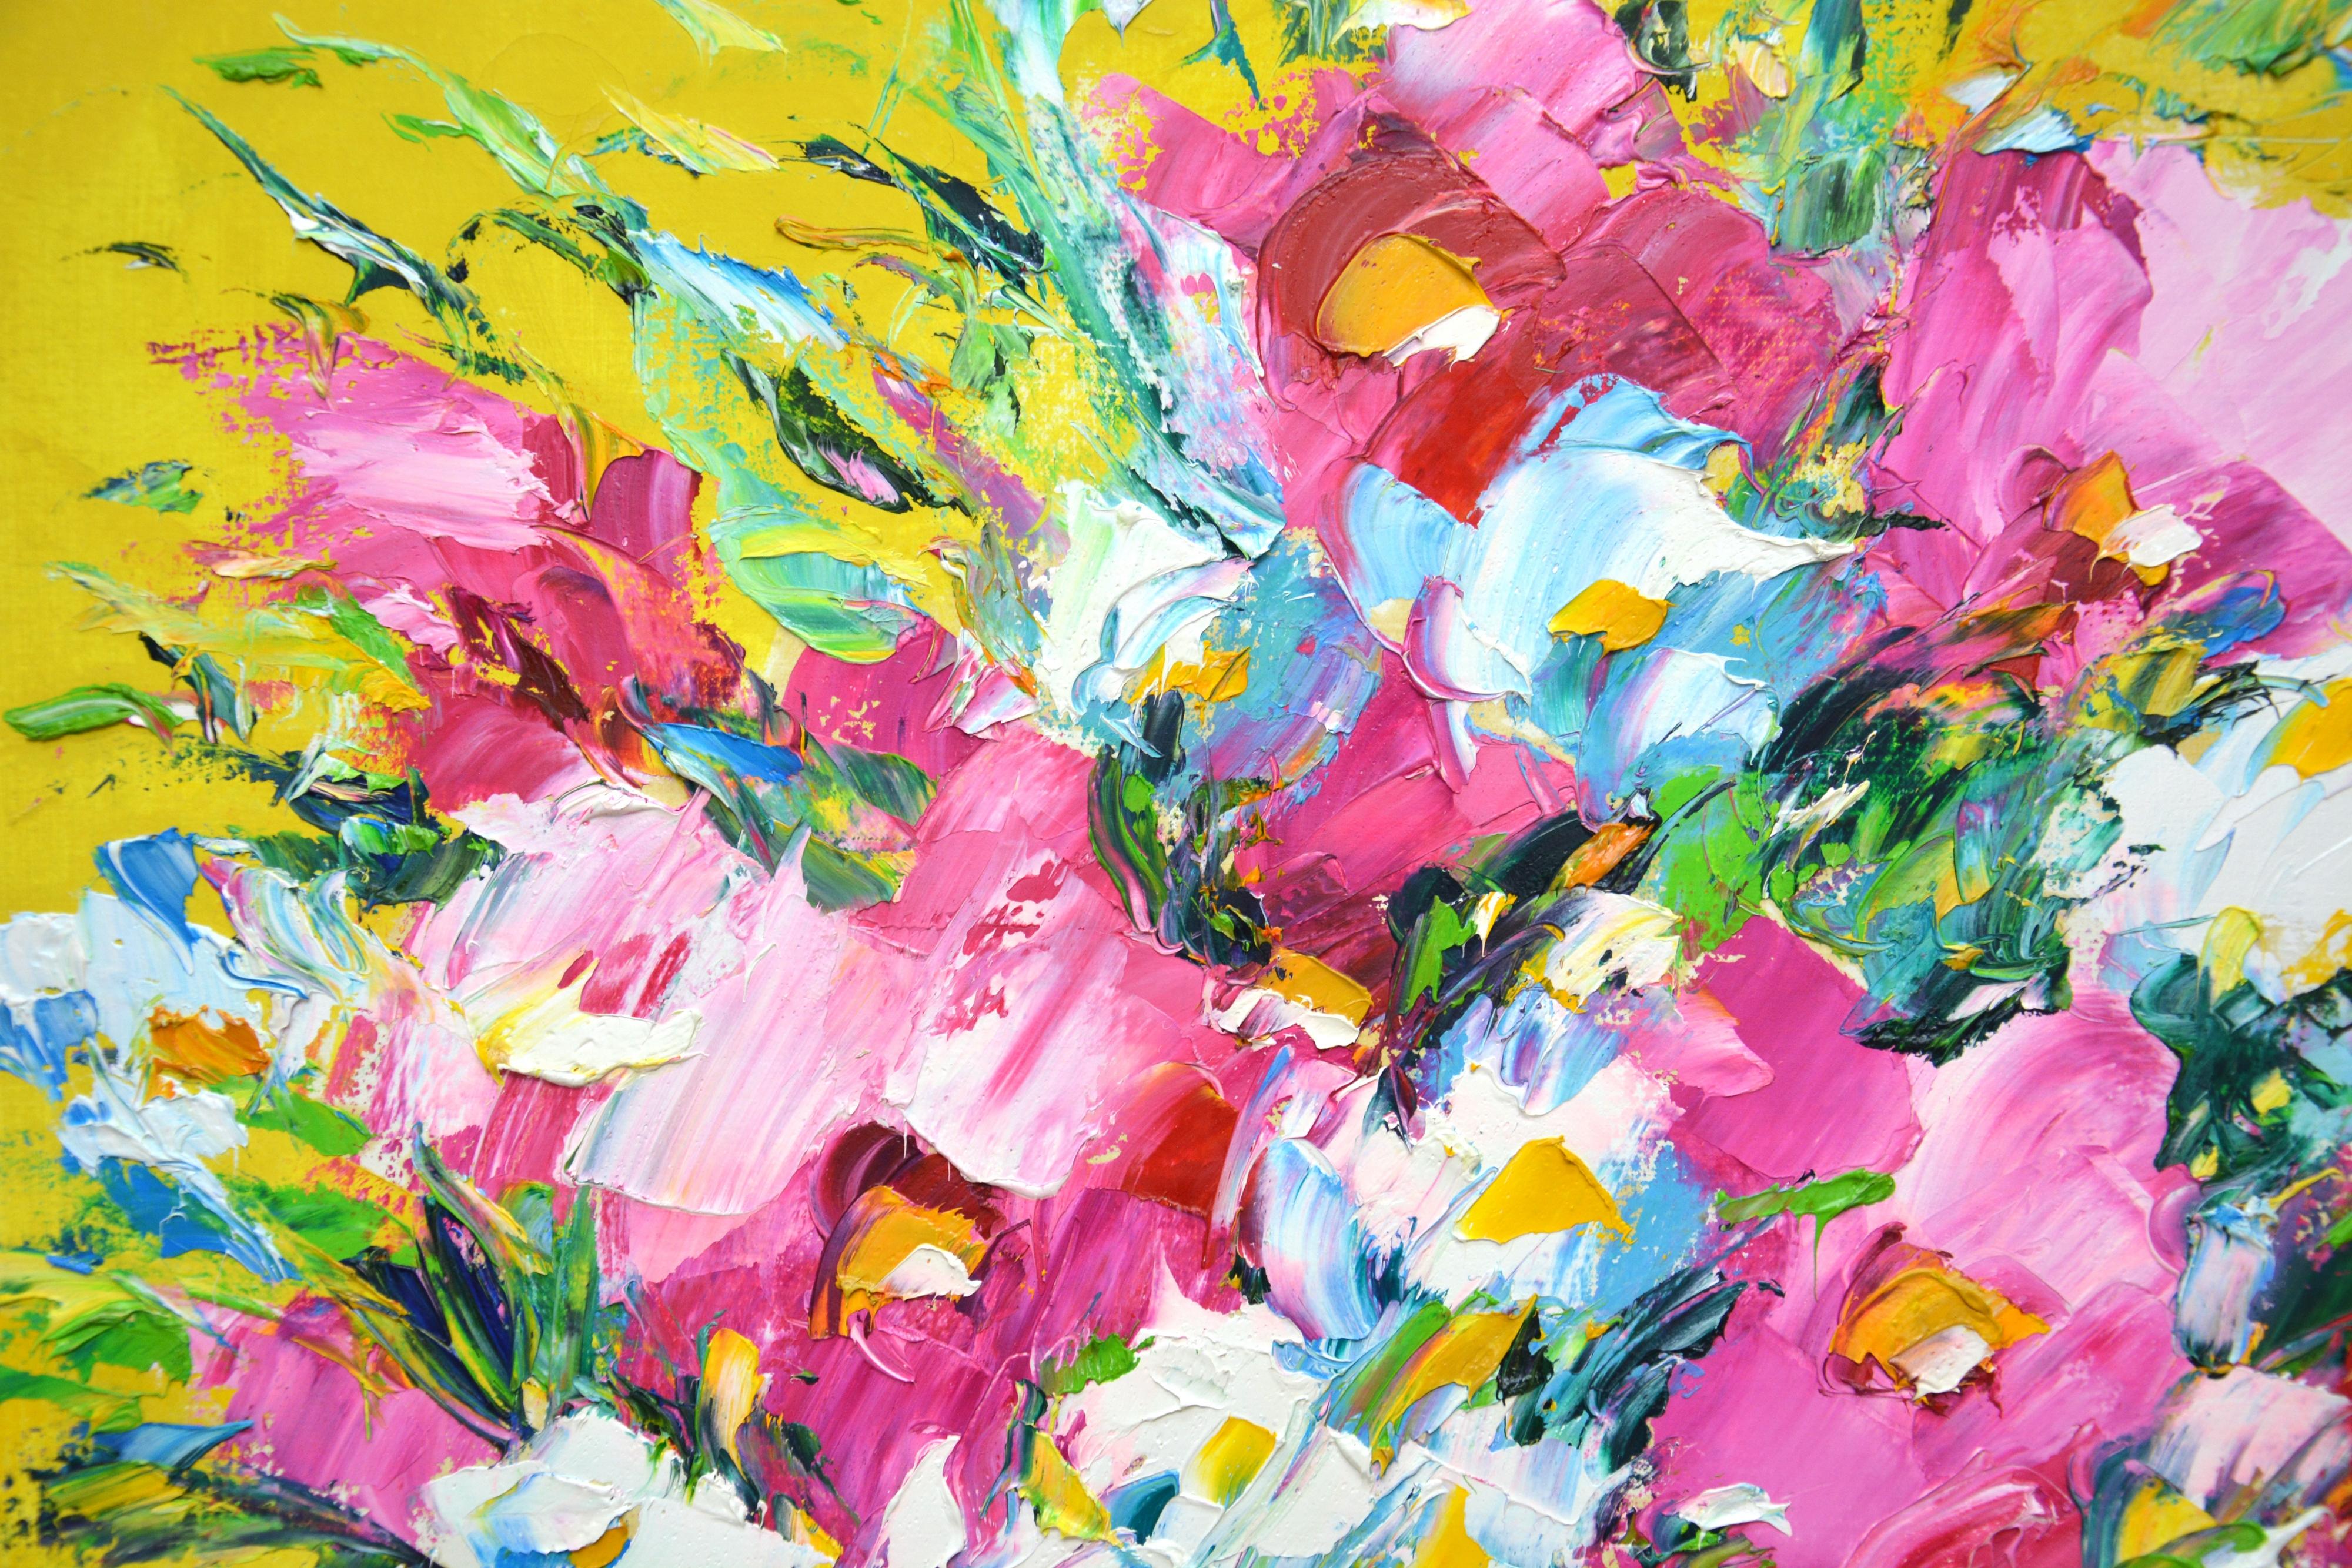 A summer bouquet of bright white, pink, flowers is presented on an abstract yellow background. When the eye moves from the center of the image to the edges, the flowers turn into a colorful gamut of abstract strokes that create tremendous energy in